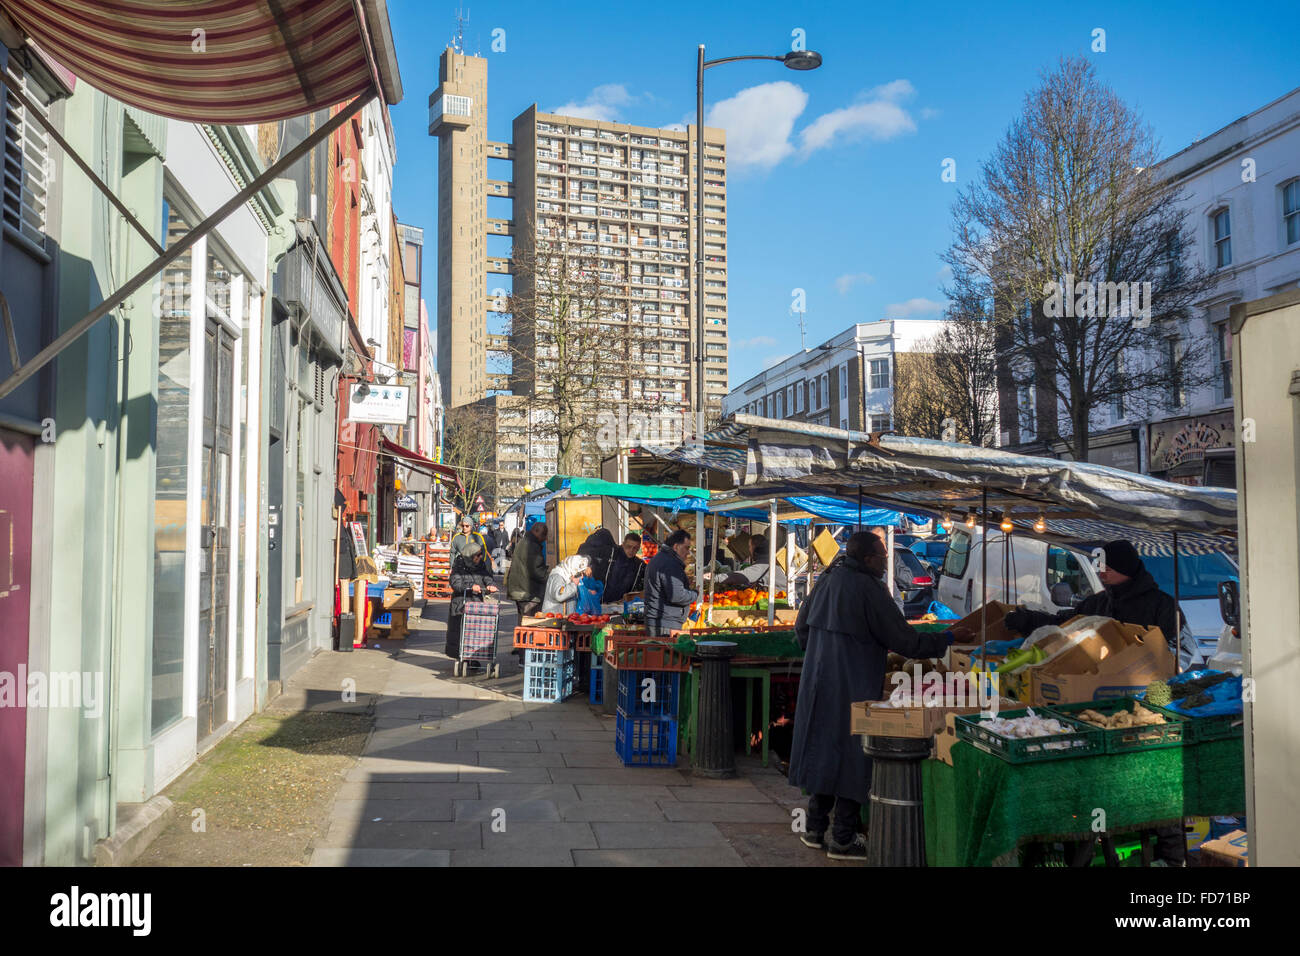 Market stalls on Golborne Road with Trellick Tower in the background, North Kensington, London, UK Stock Photo